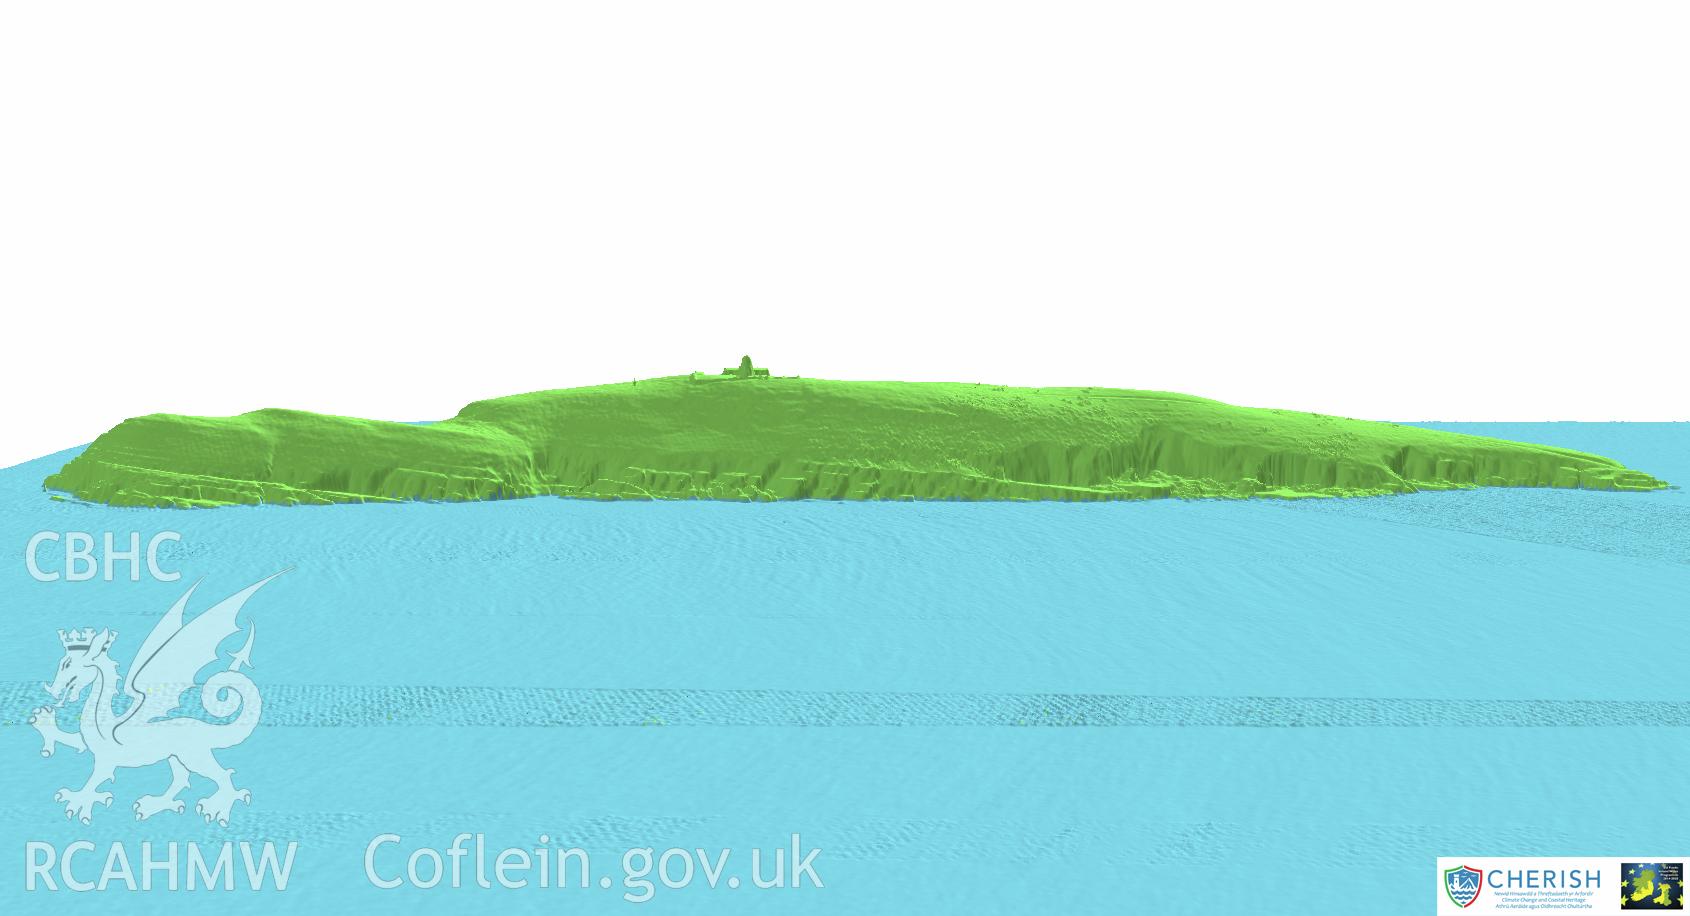 Ynysoedd Tudwal (St. Tudwal?s Islands). Airborne laser scanning (LiDAR) commissioned by the CHERISH Project 2017-2021, flown by Bluesky International LTD at low tide on 24th February 2017. View showing the west island facing north-east.